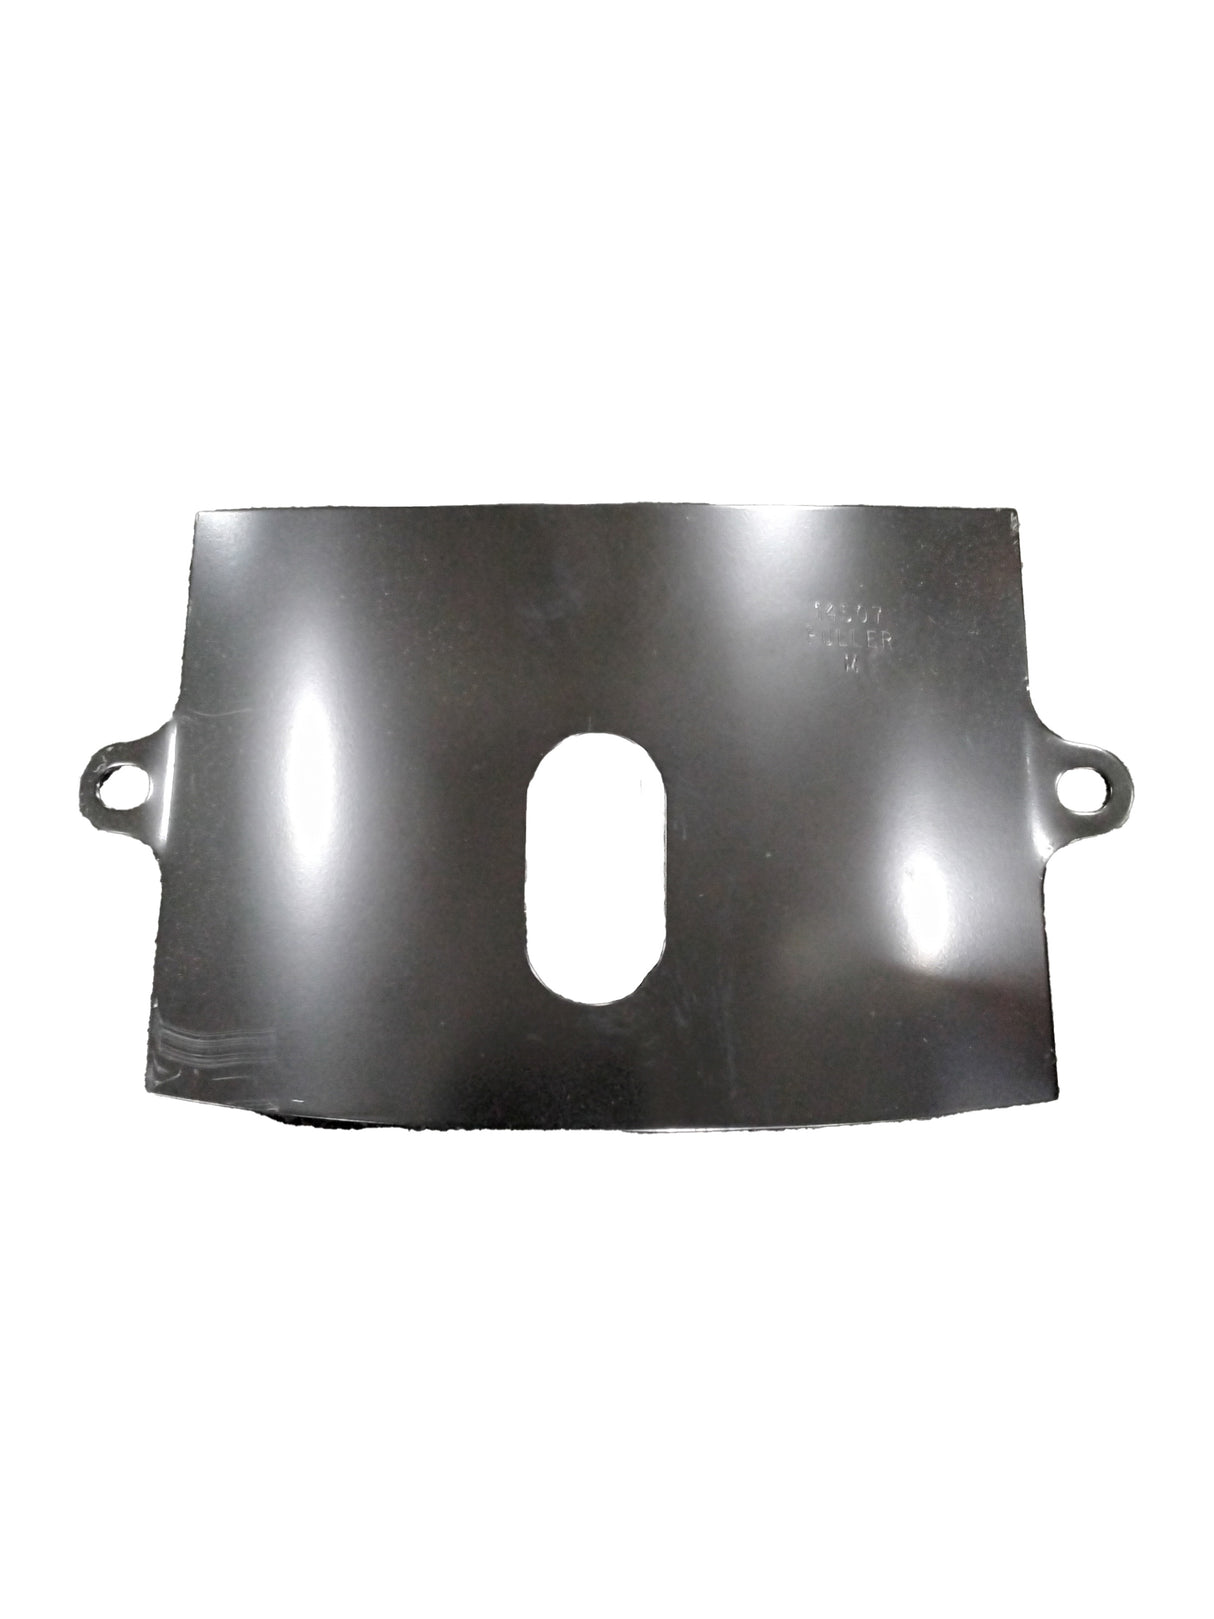 FULLER  ­-­ 14507 ­-­ HAND HOLE COVER PLATE